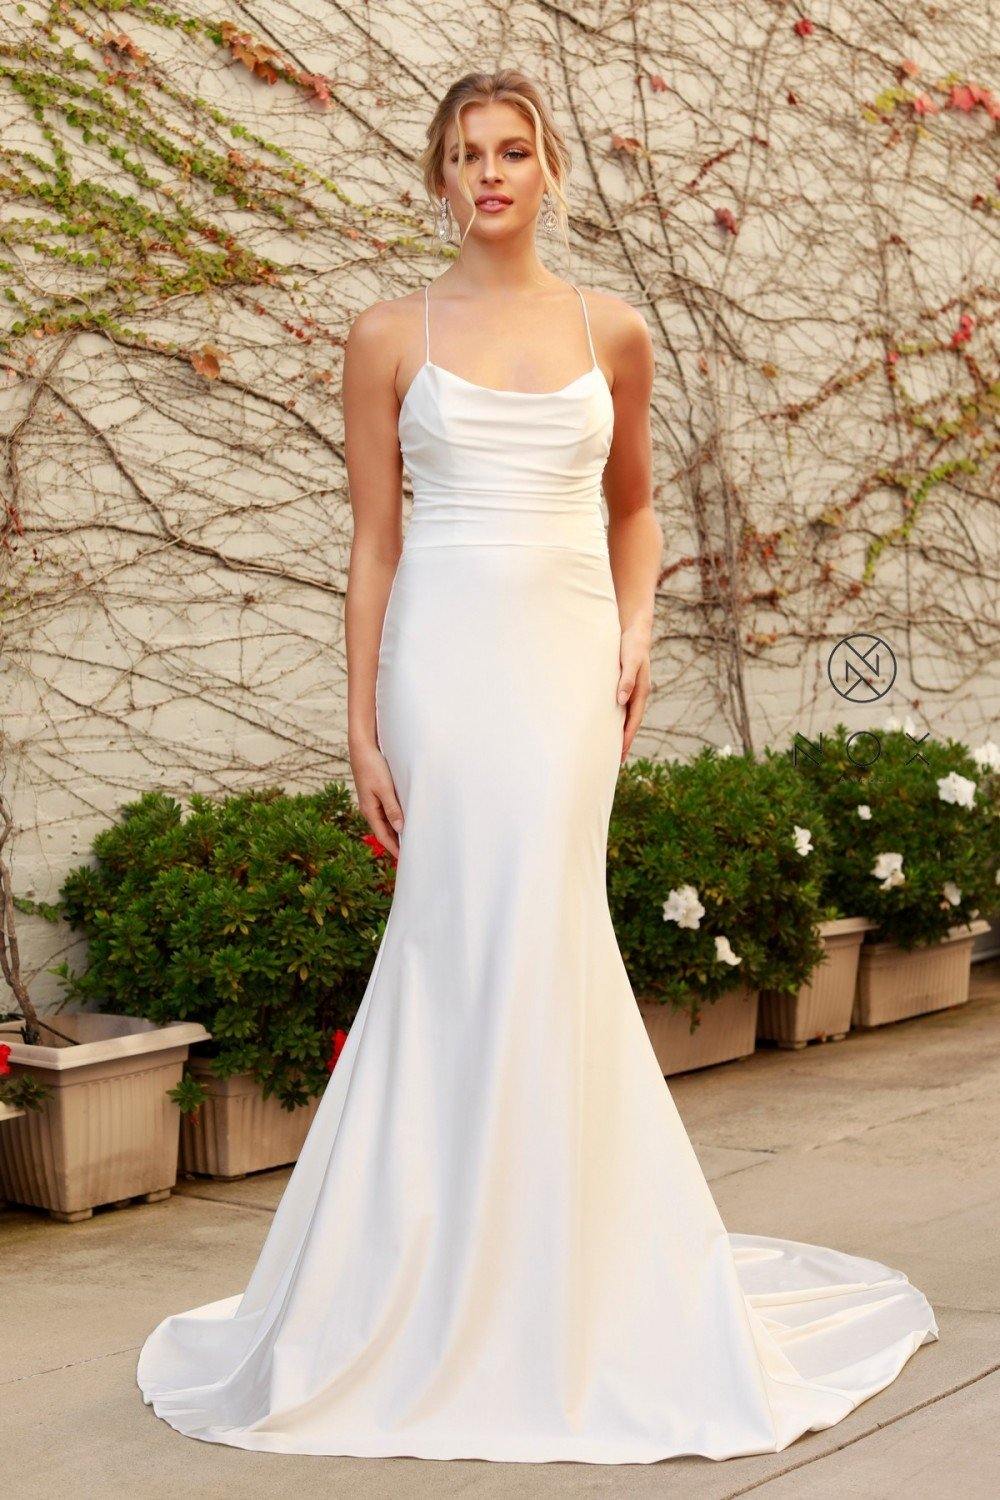 Long Mermaid Style Wedding Dress - The Dress Outlet